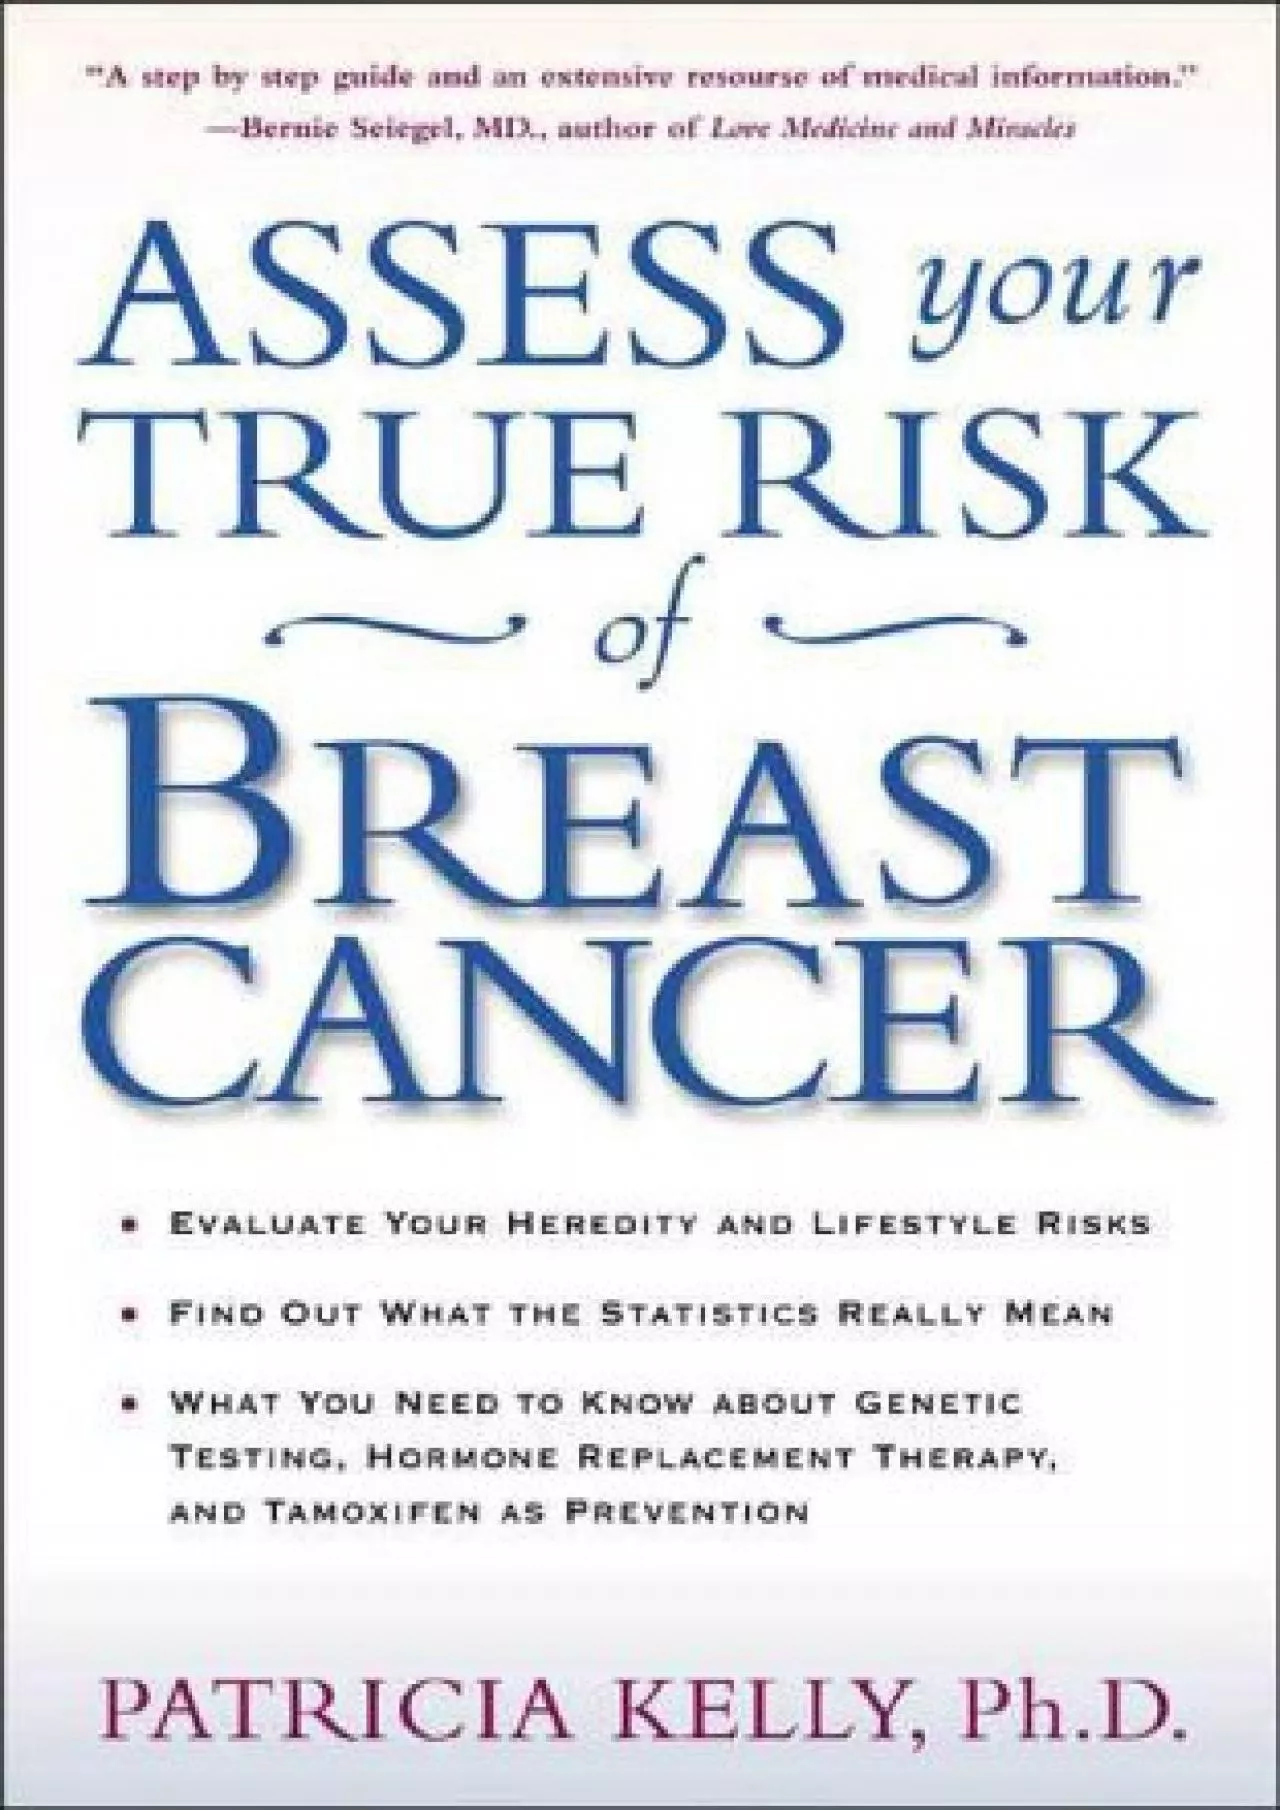 (DOWNLOAD)-Assess Your True Risk of Breast Cancer